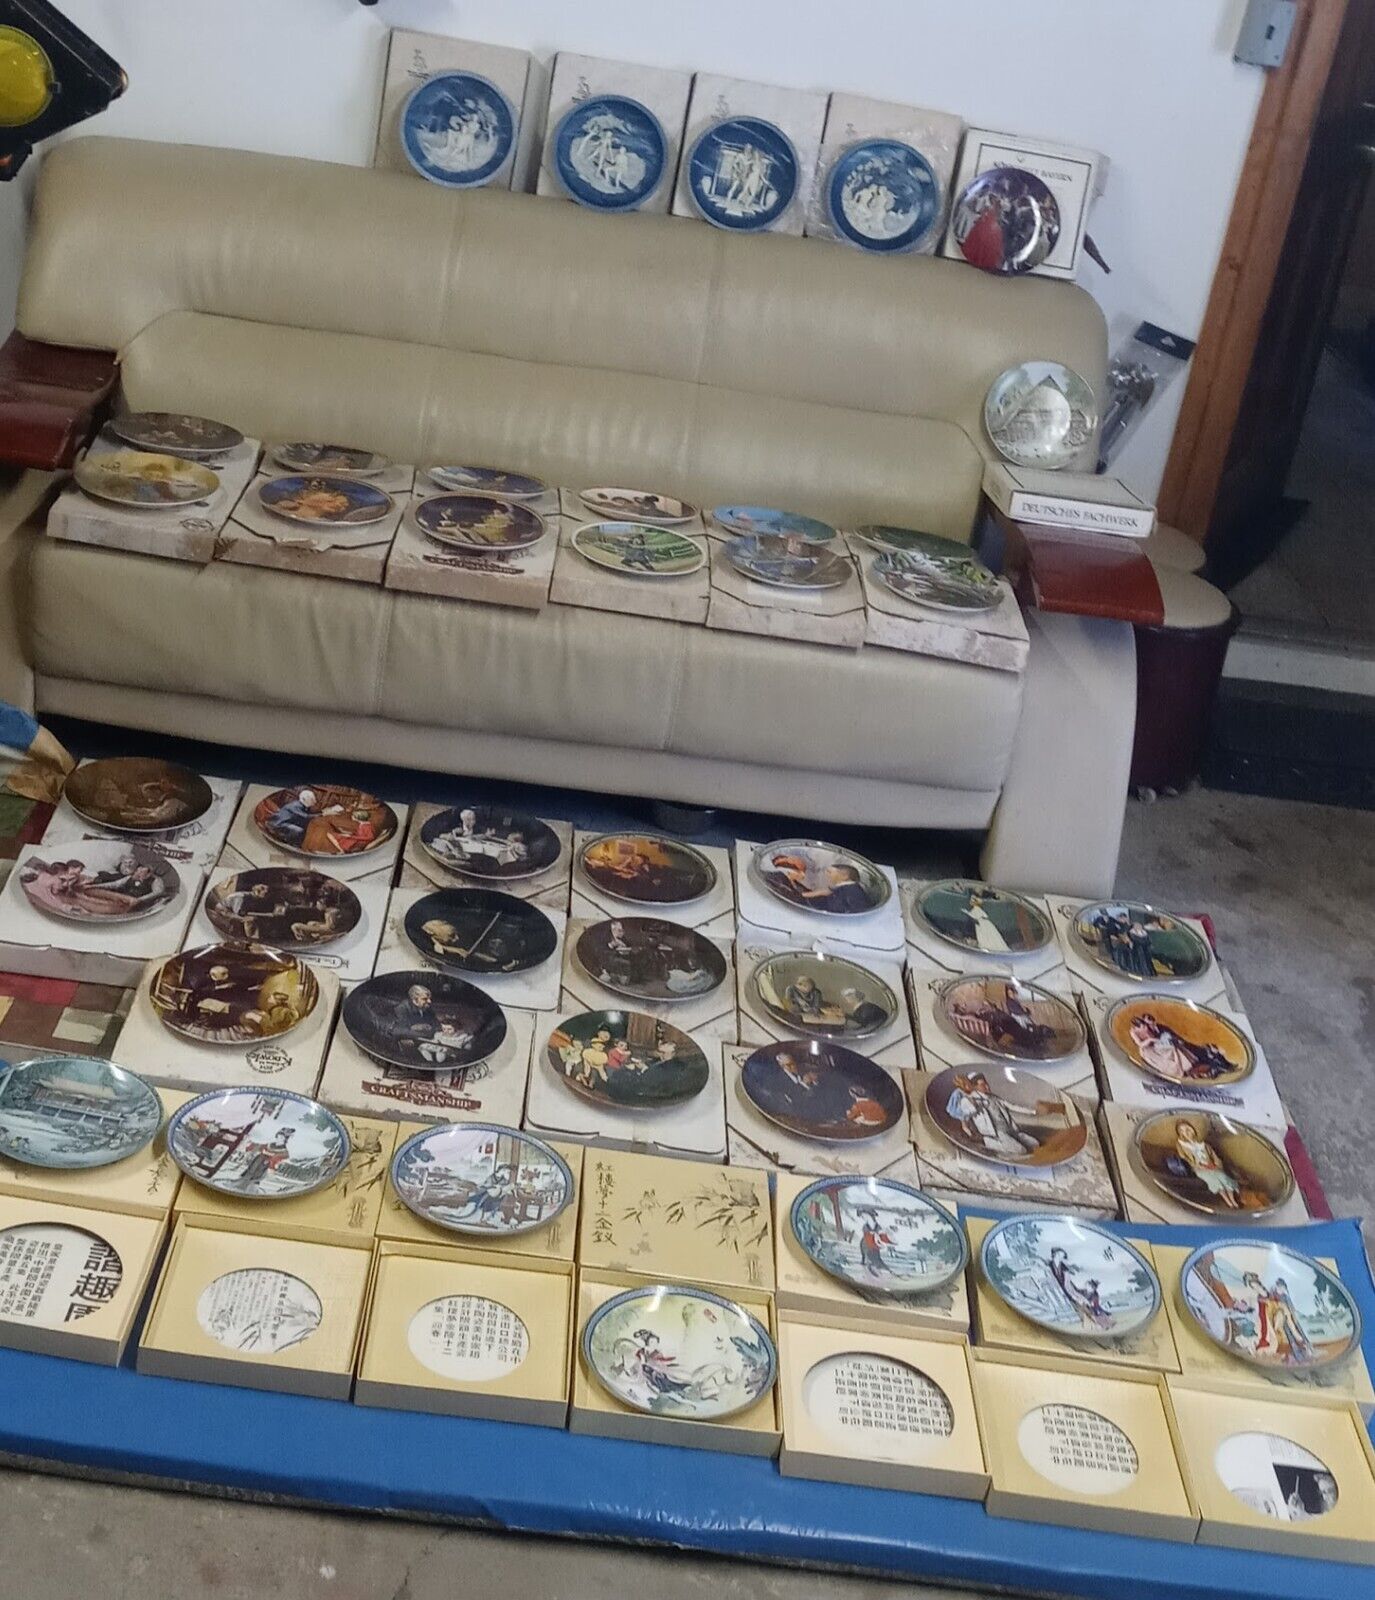 43 Vintage Plate collections Boxes with Paperwork *Norman Rockwell, Knowles ect.